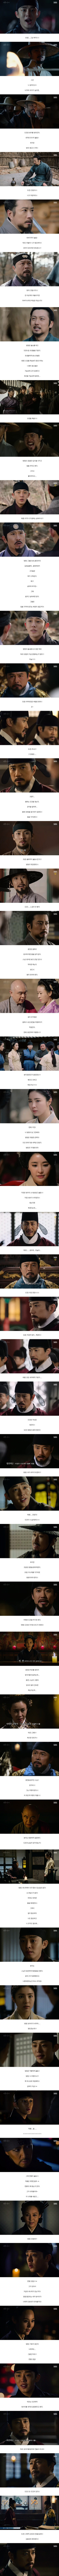 episode 38 captures for the Korean drama 'Six Flying Dragons'